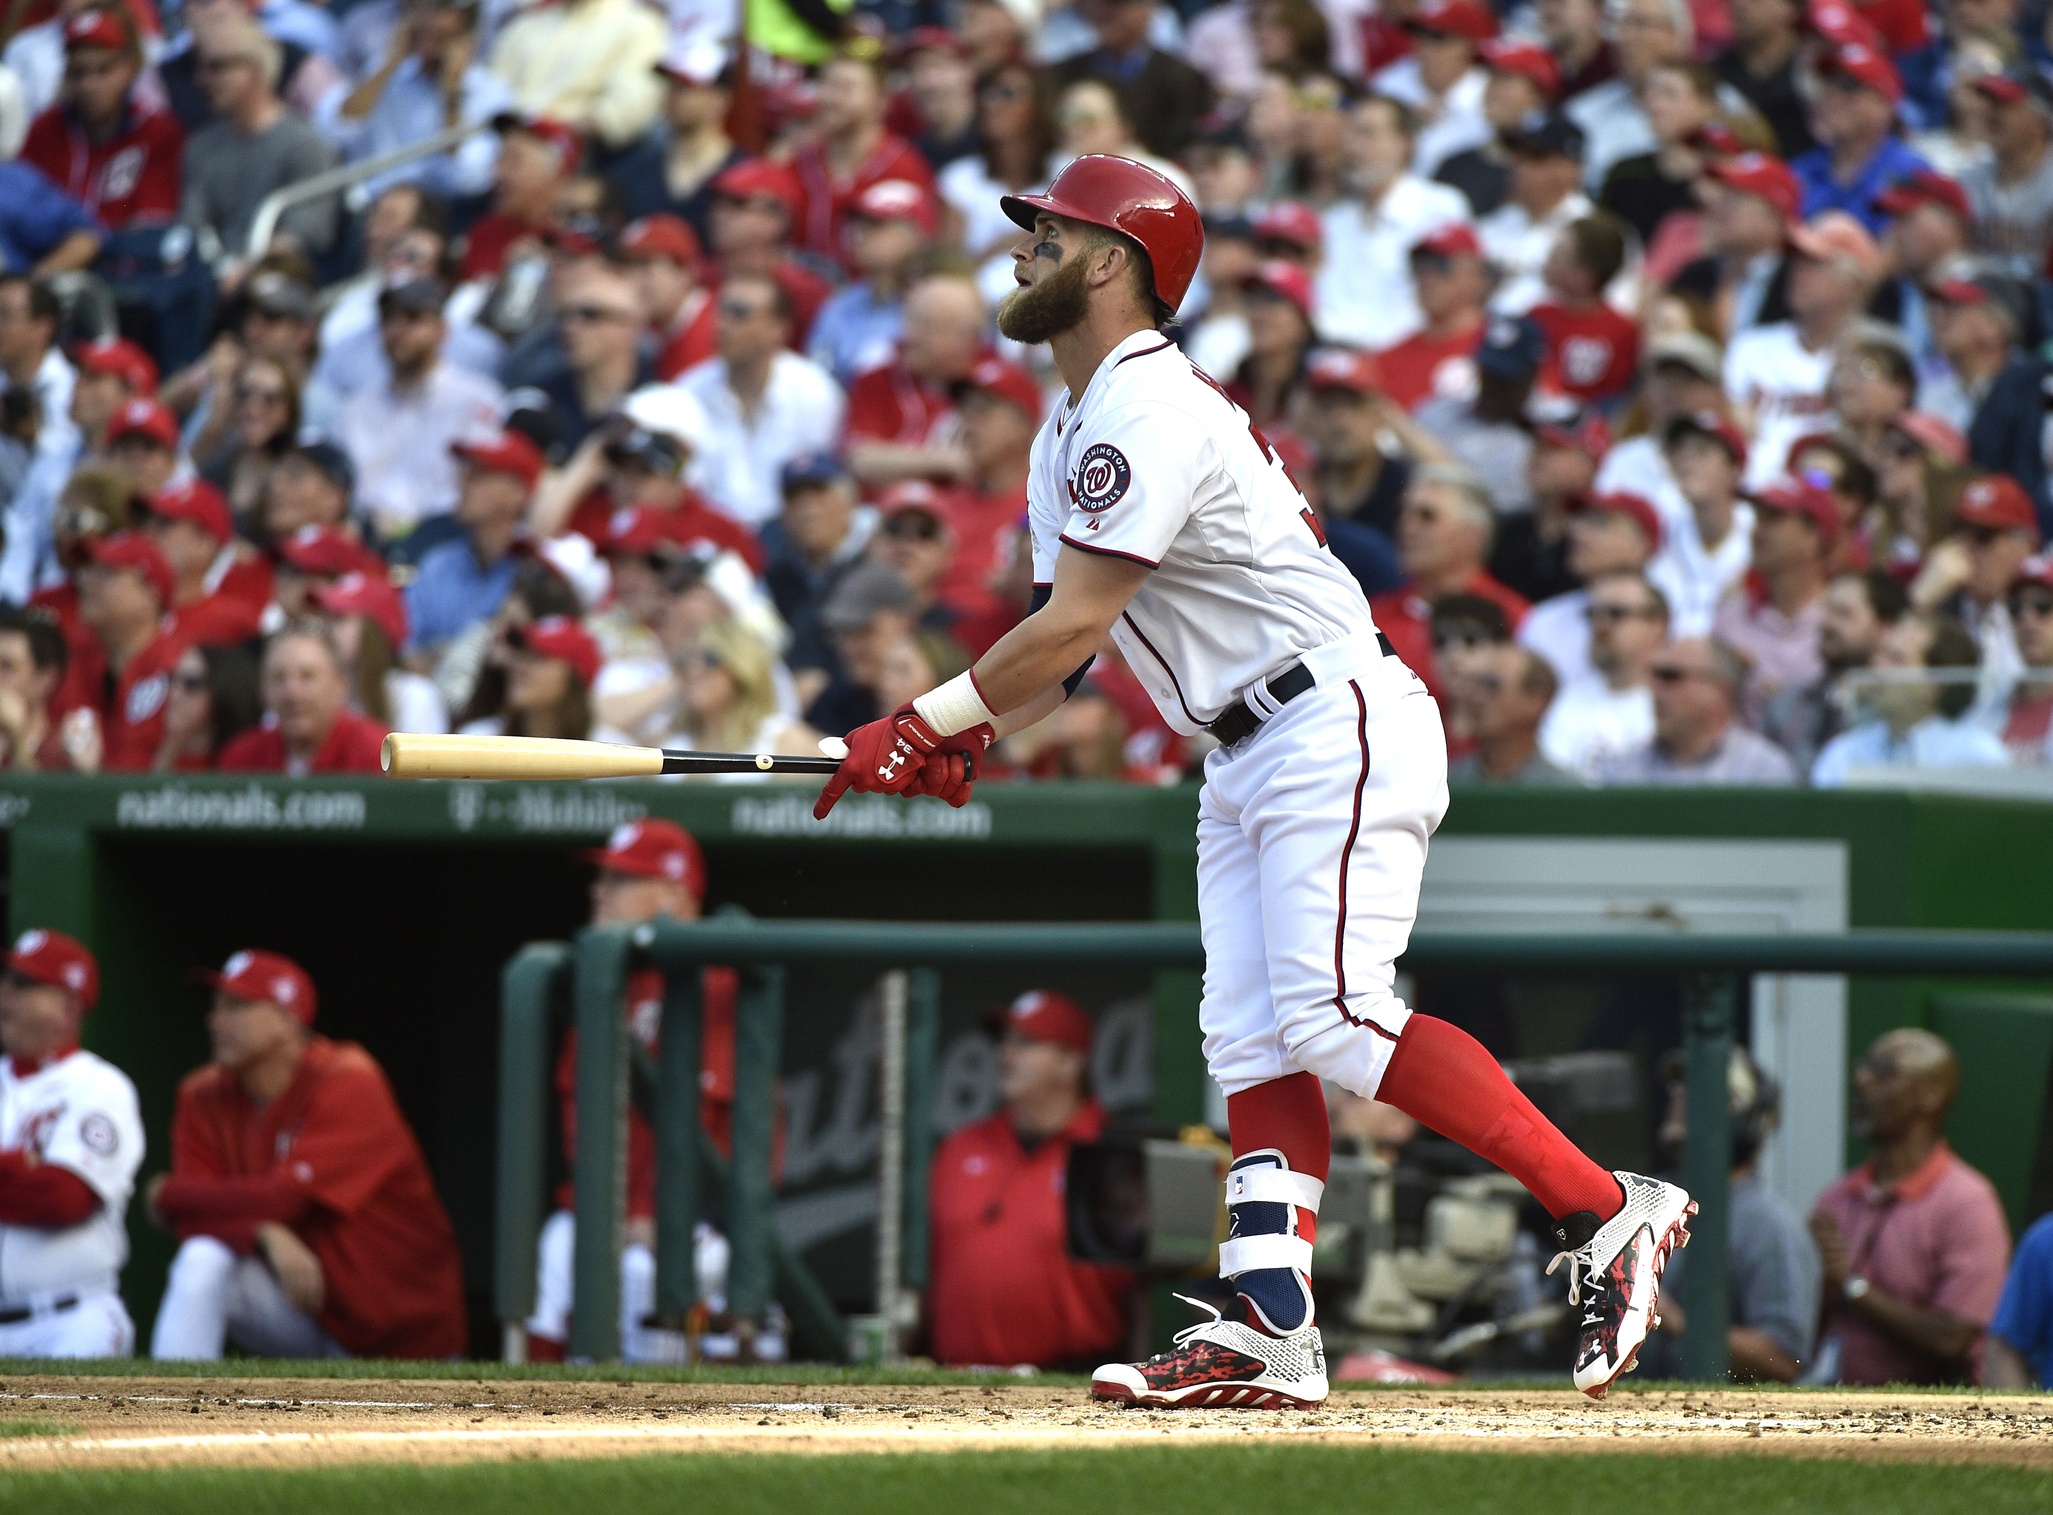 VIDEO Bryce Harper Hits Opening Day Home Run... Again